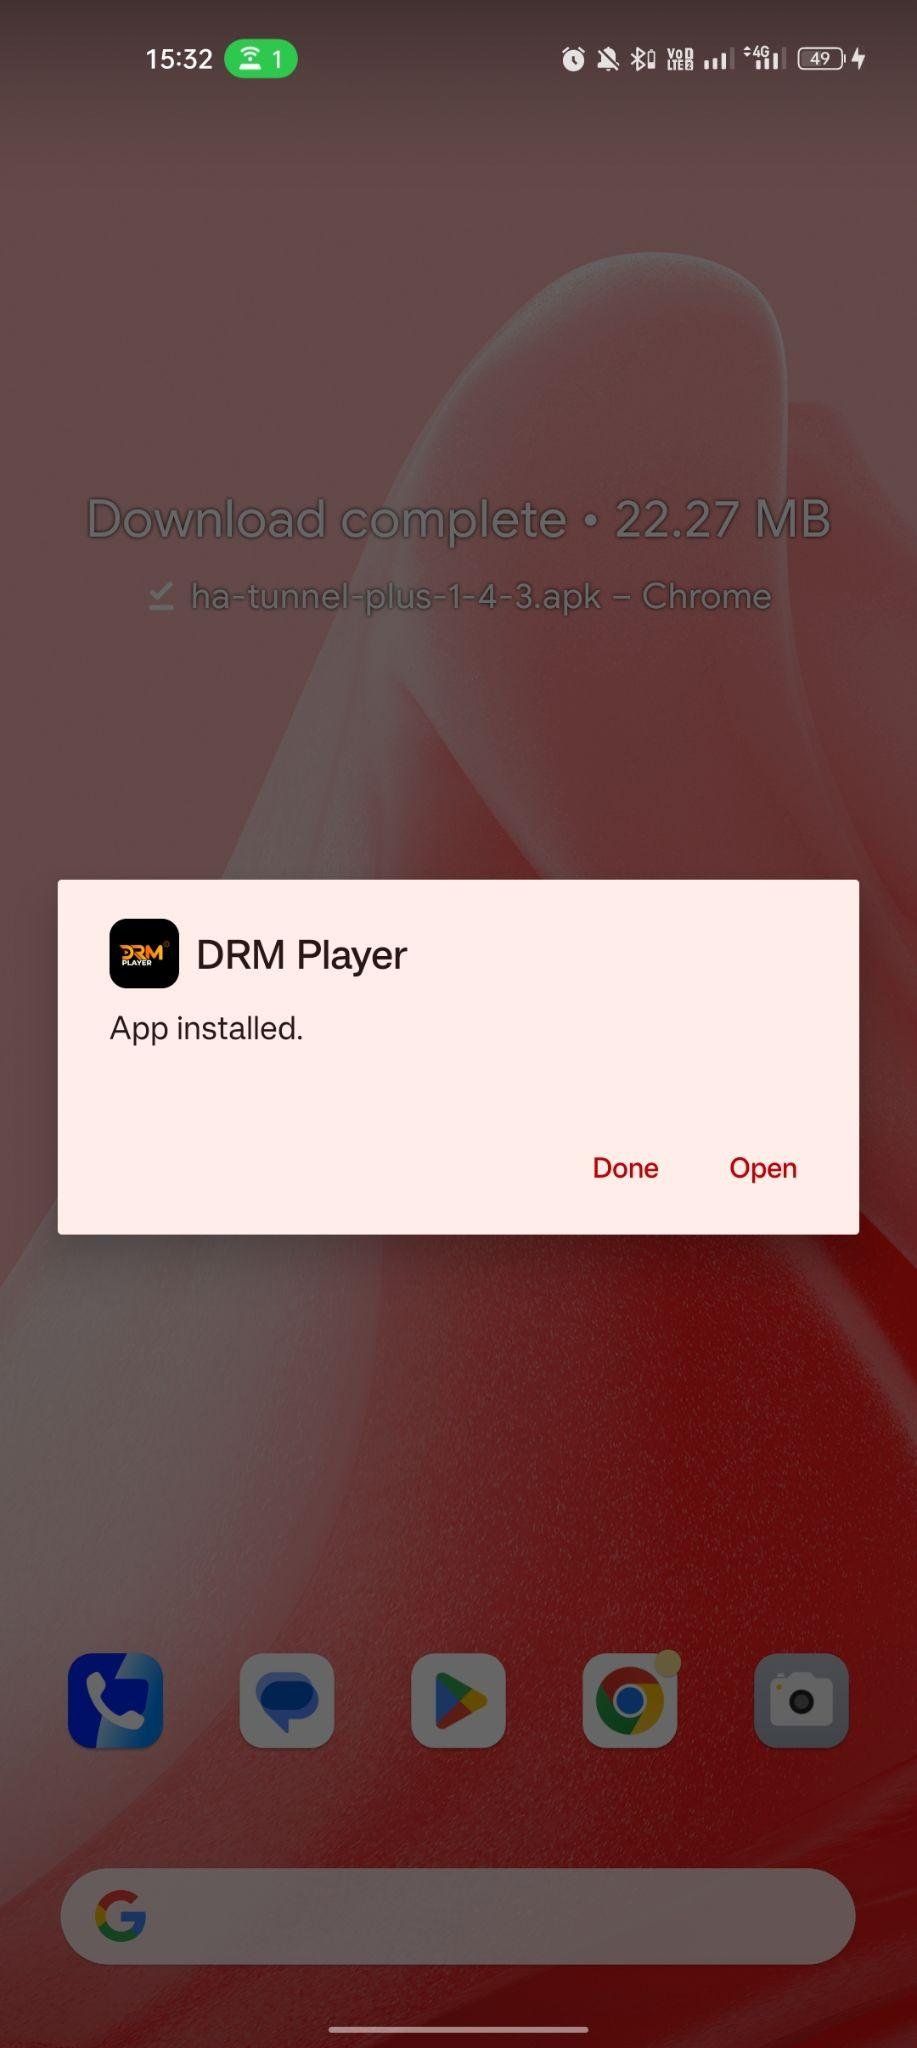 DRM Player apk installed